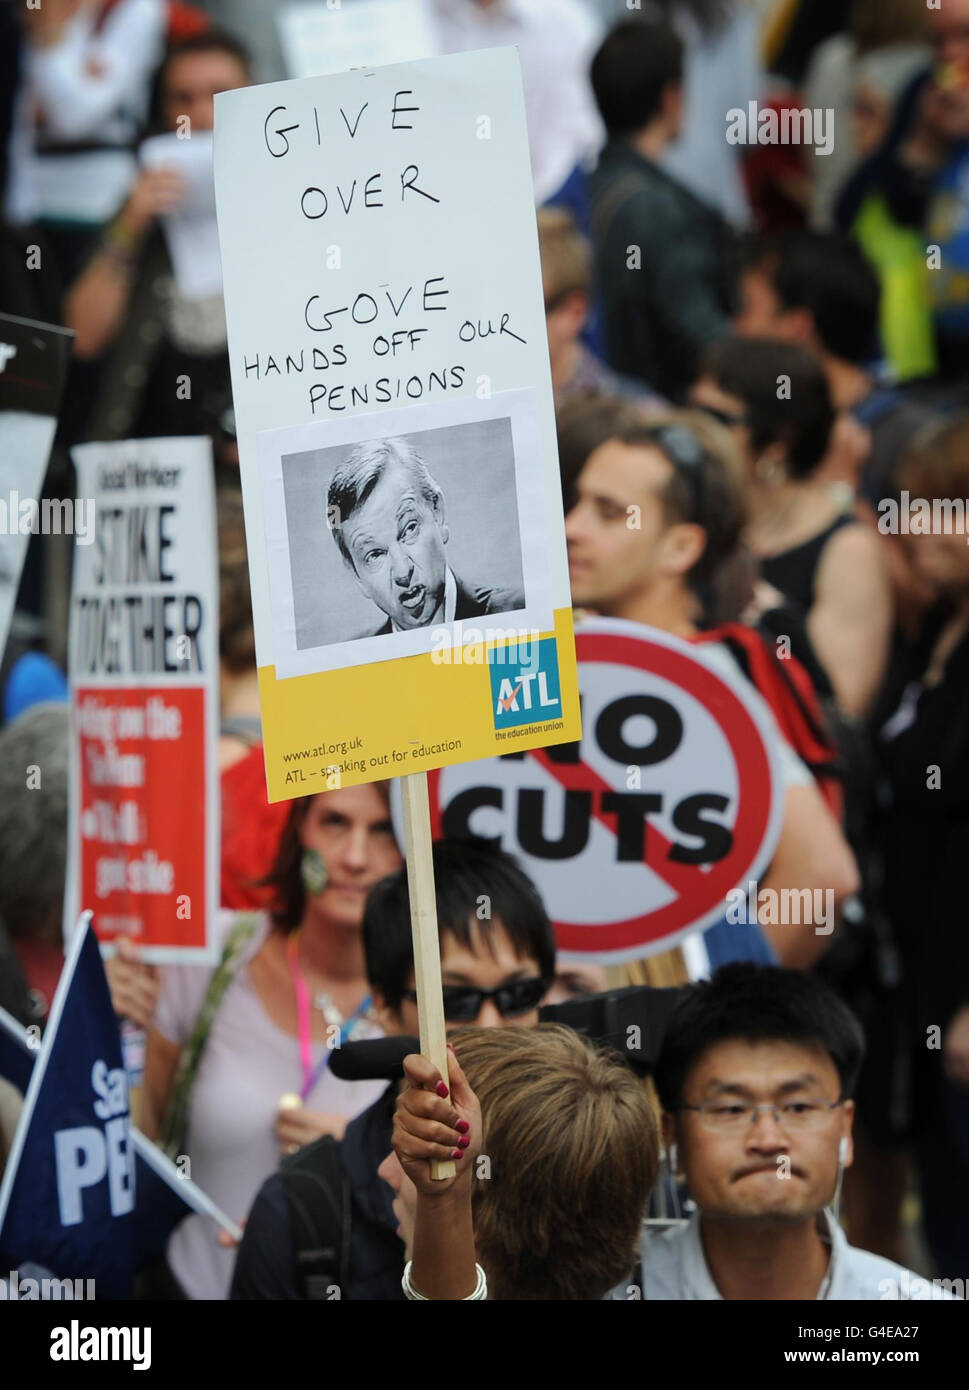 Demonstrators in central London take part in a protest through the capital against the UK government's plans for pension reform. Stock Photo